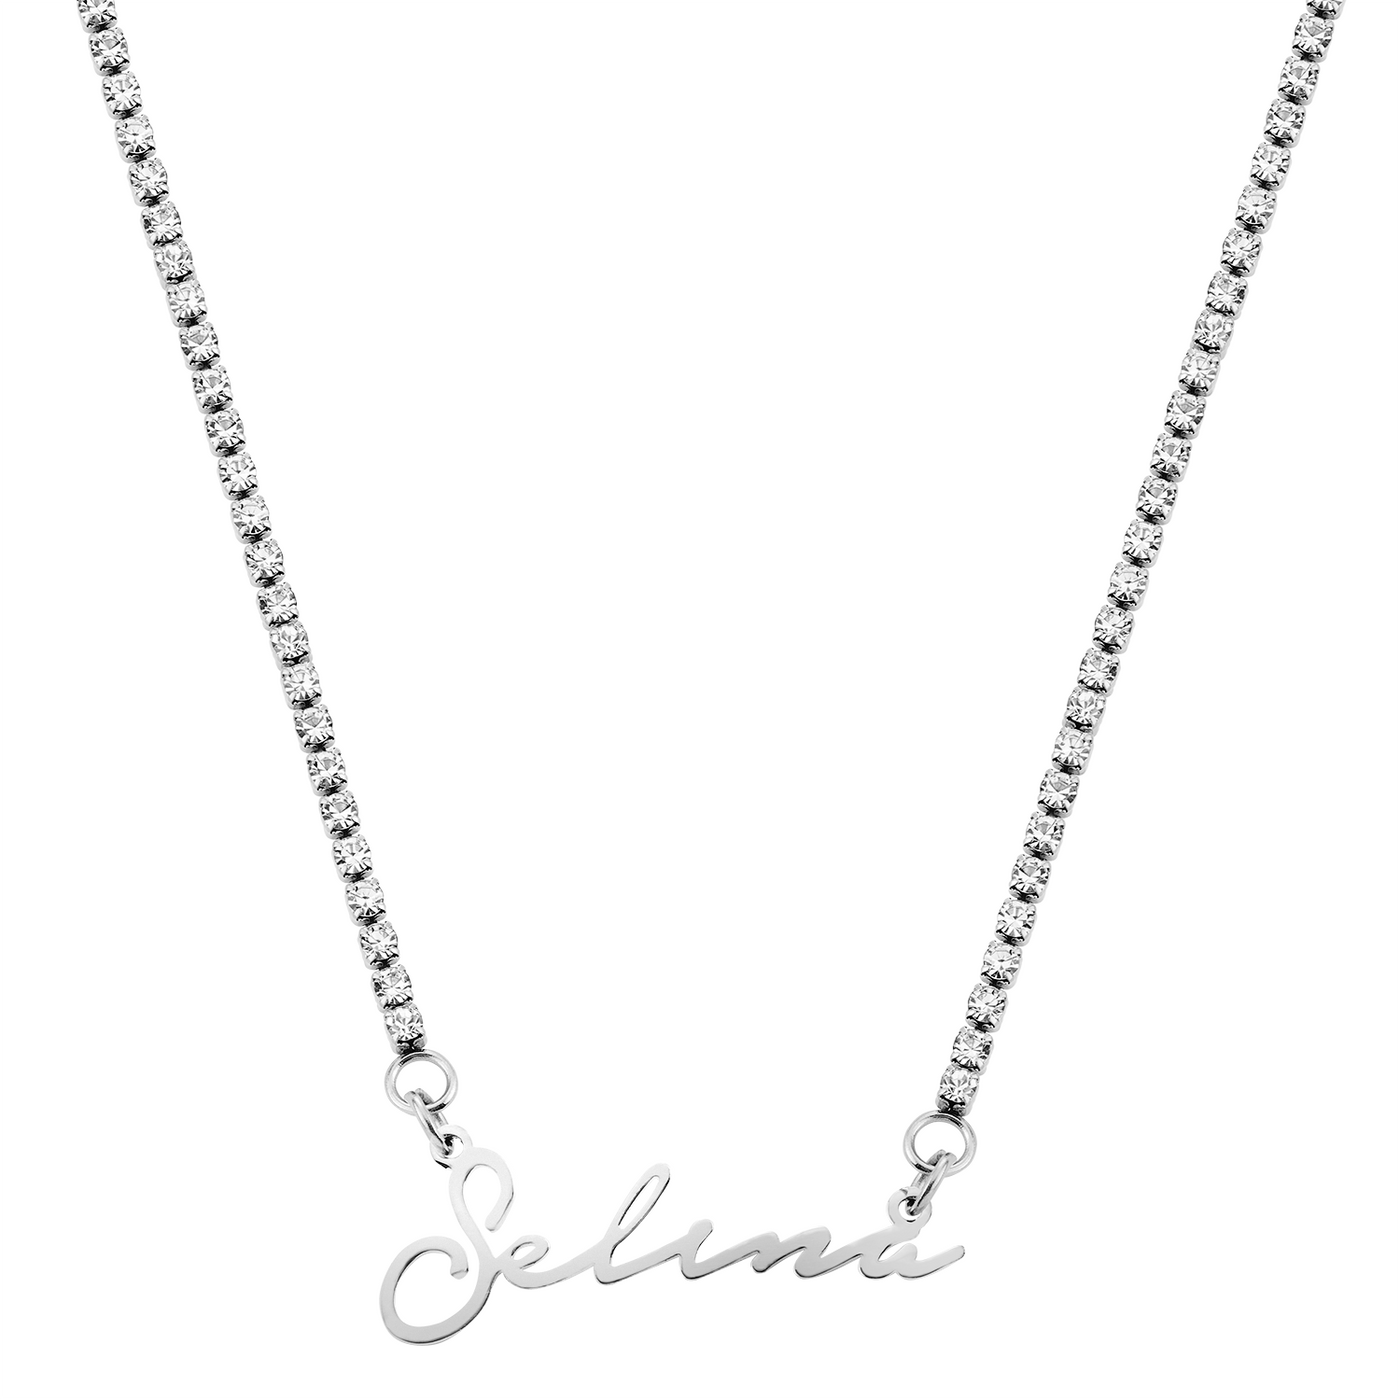 Iced name necklace